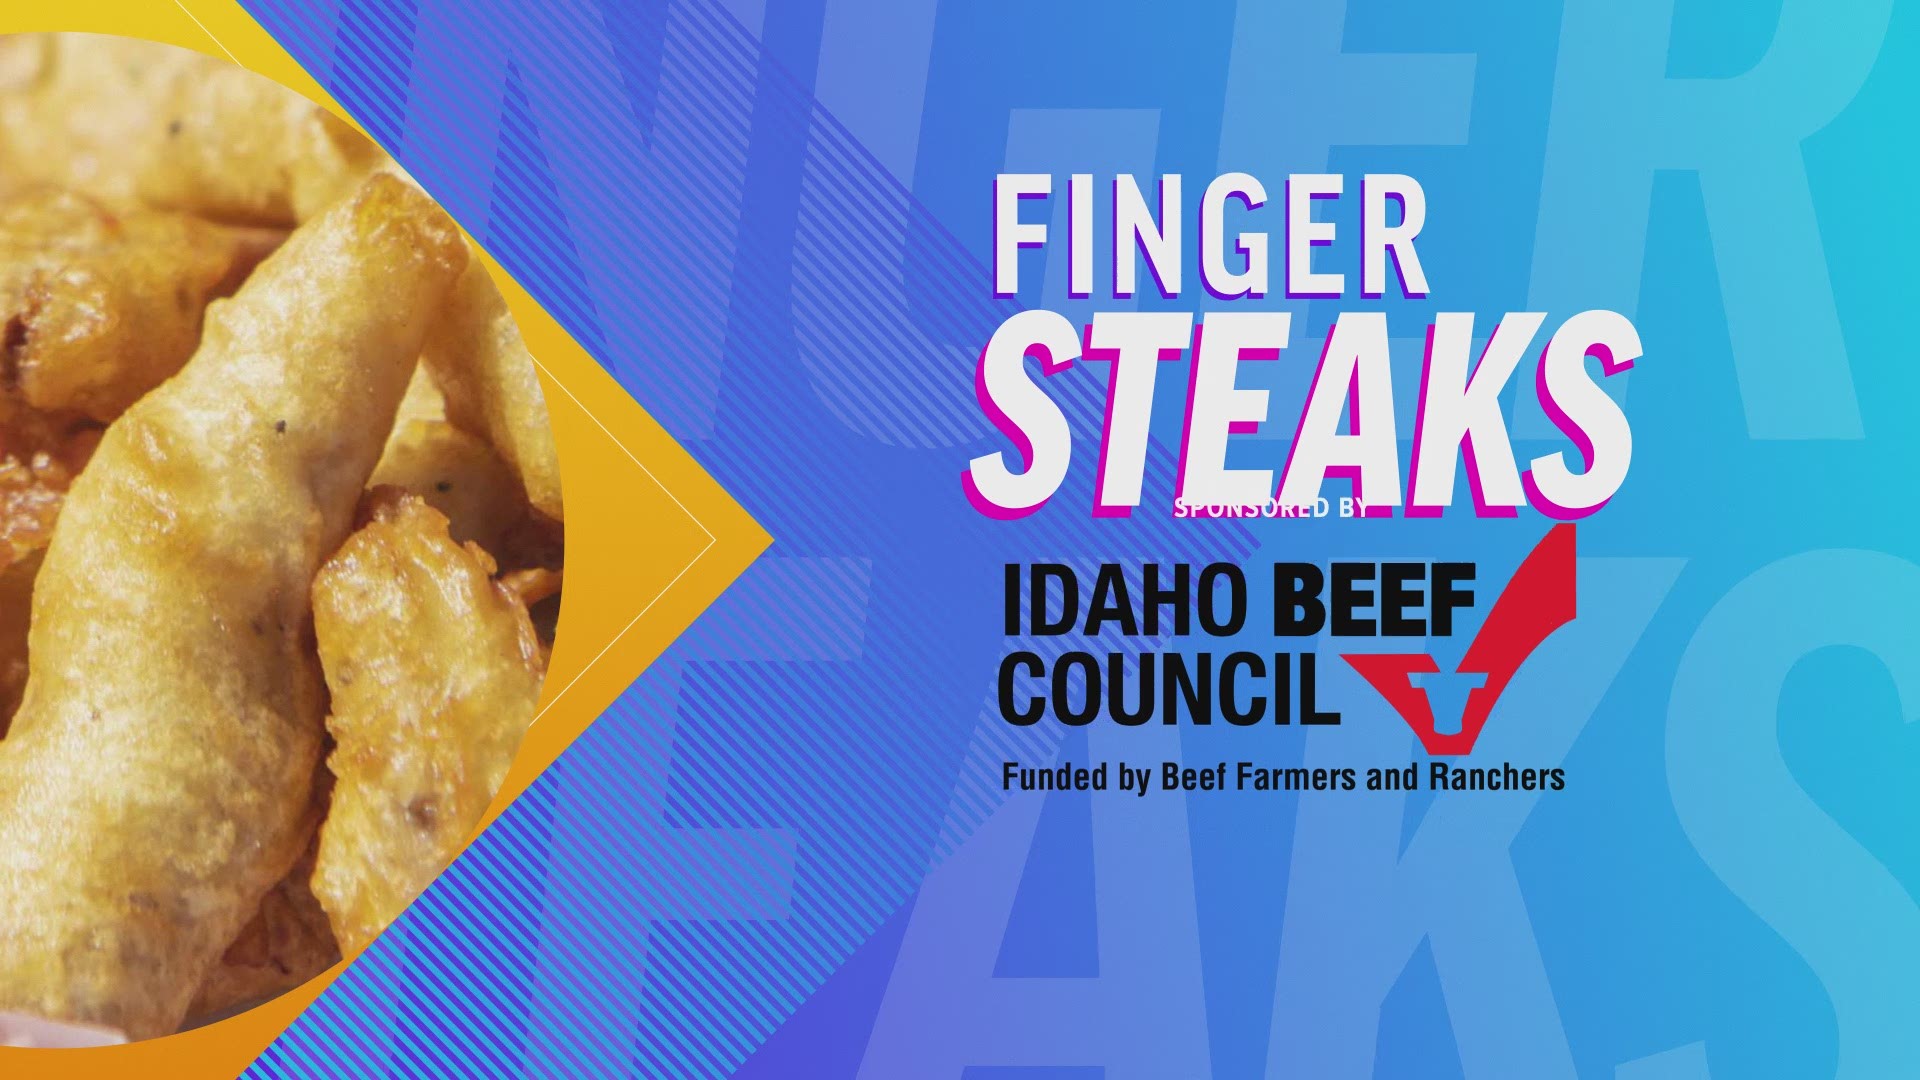 Idaho is known for potatoes, but it's also known for a very unique beef recipe. Sponsored by Idaho Beef Council.